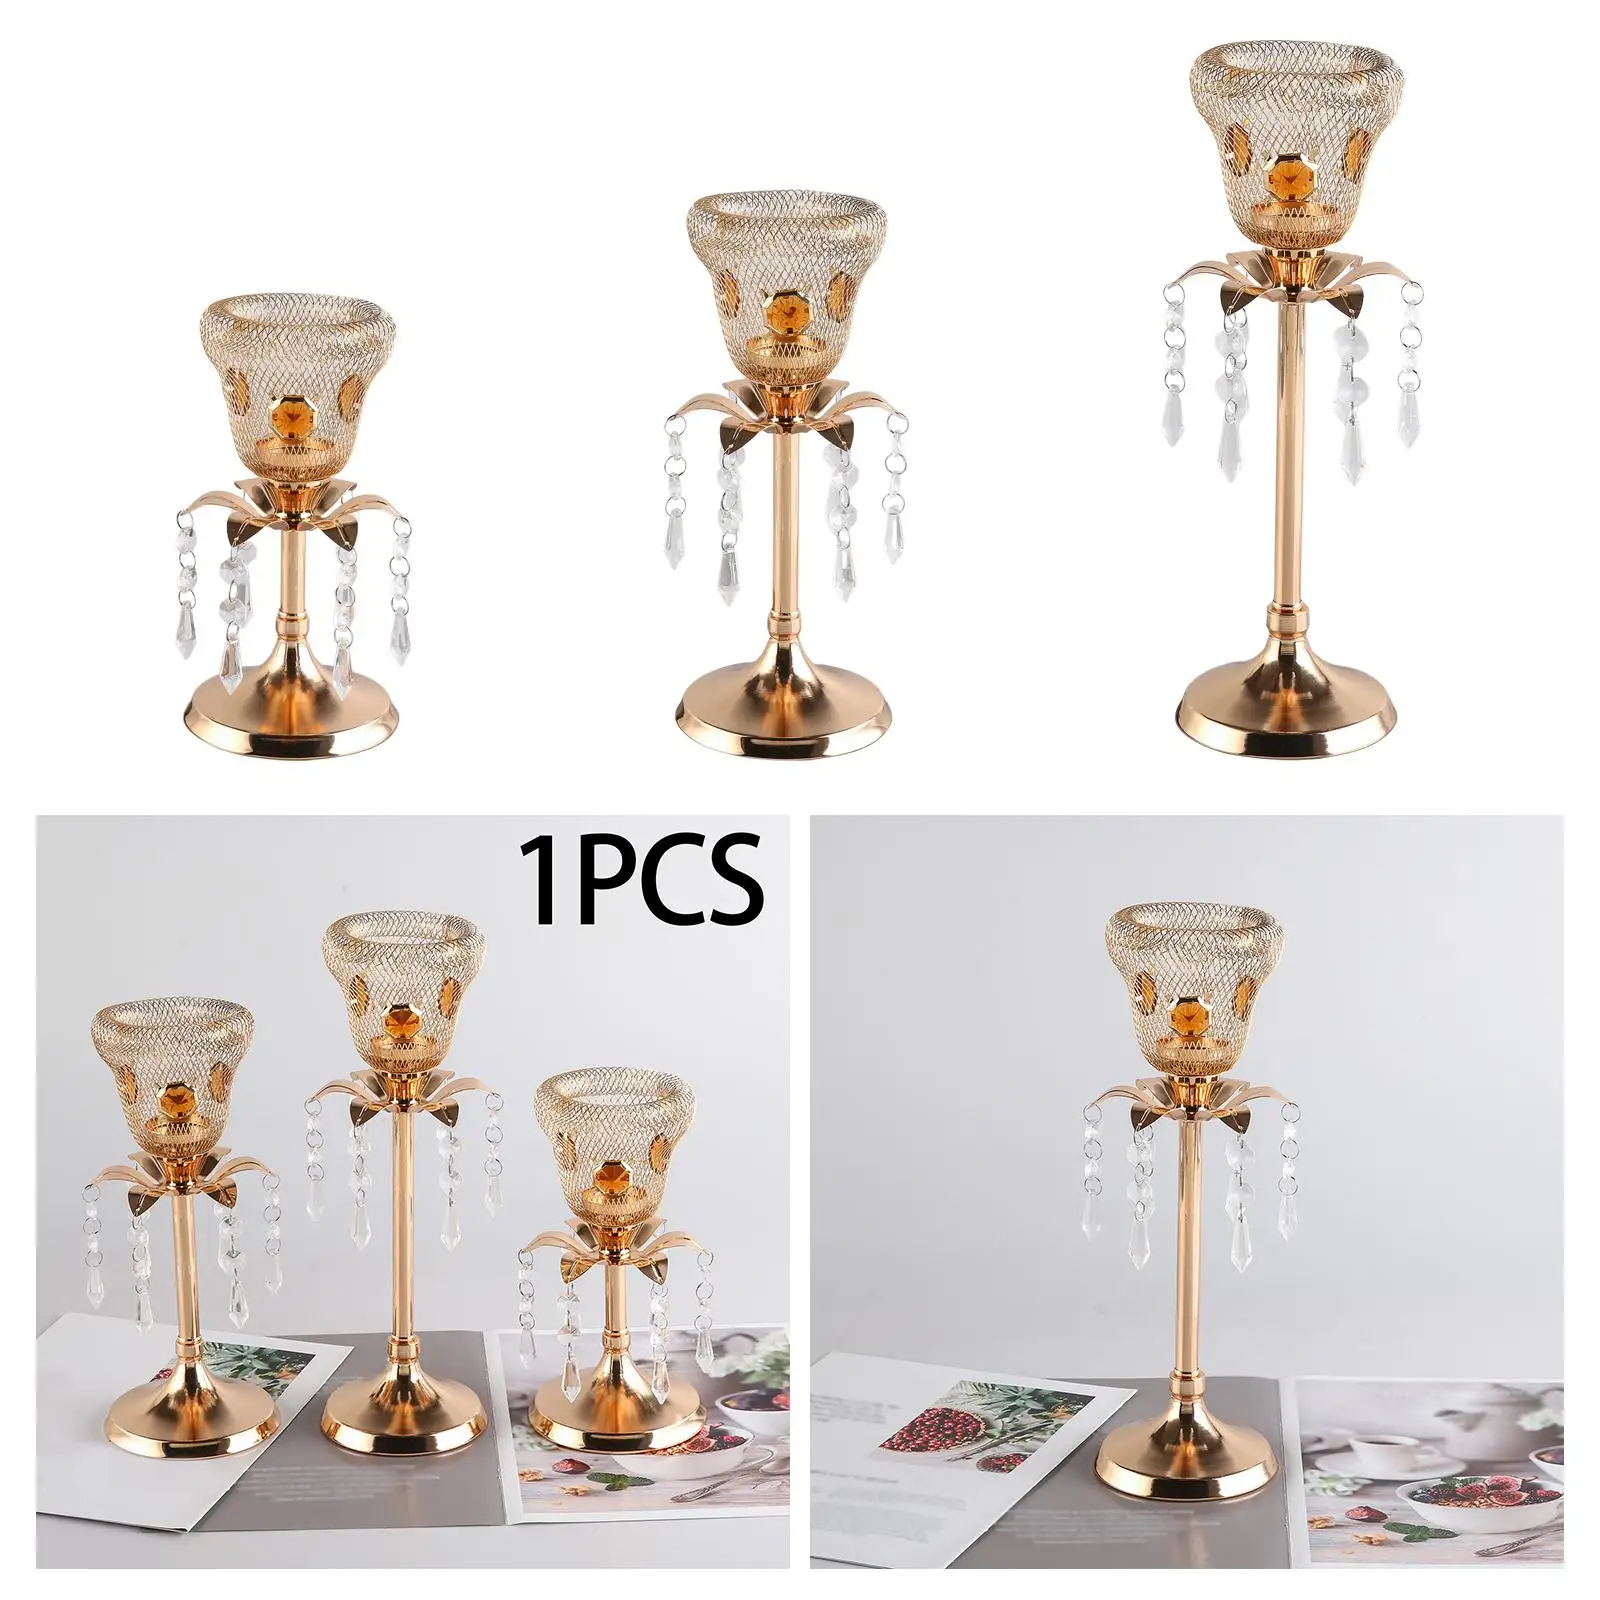 Decorative Tealight Candle Holder for Wedding, Party, Table Centerpieces Decoration